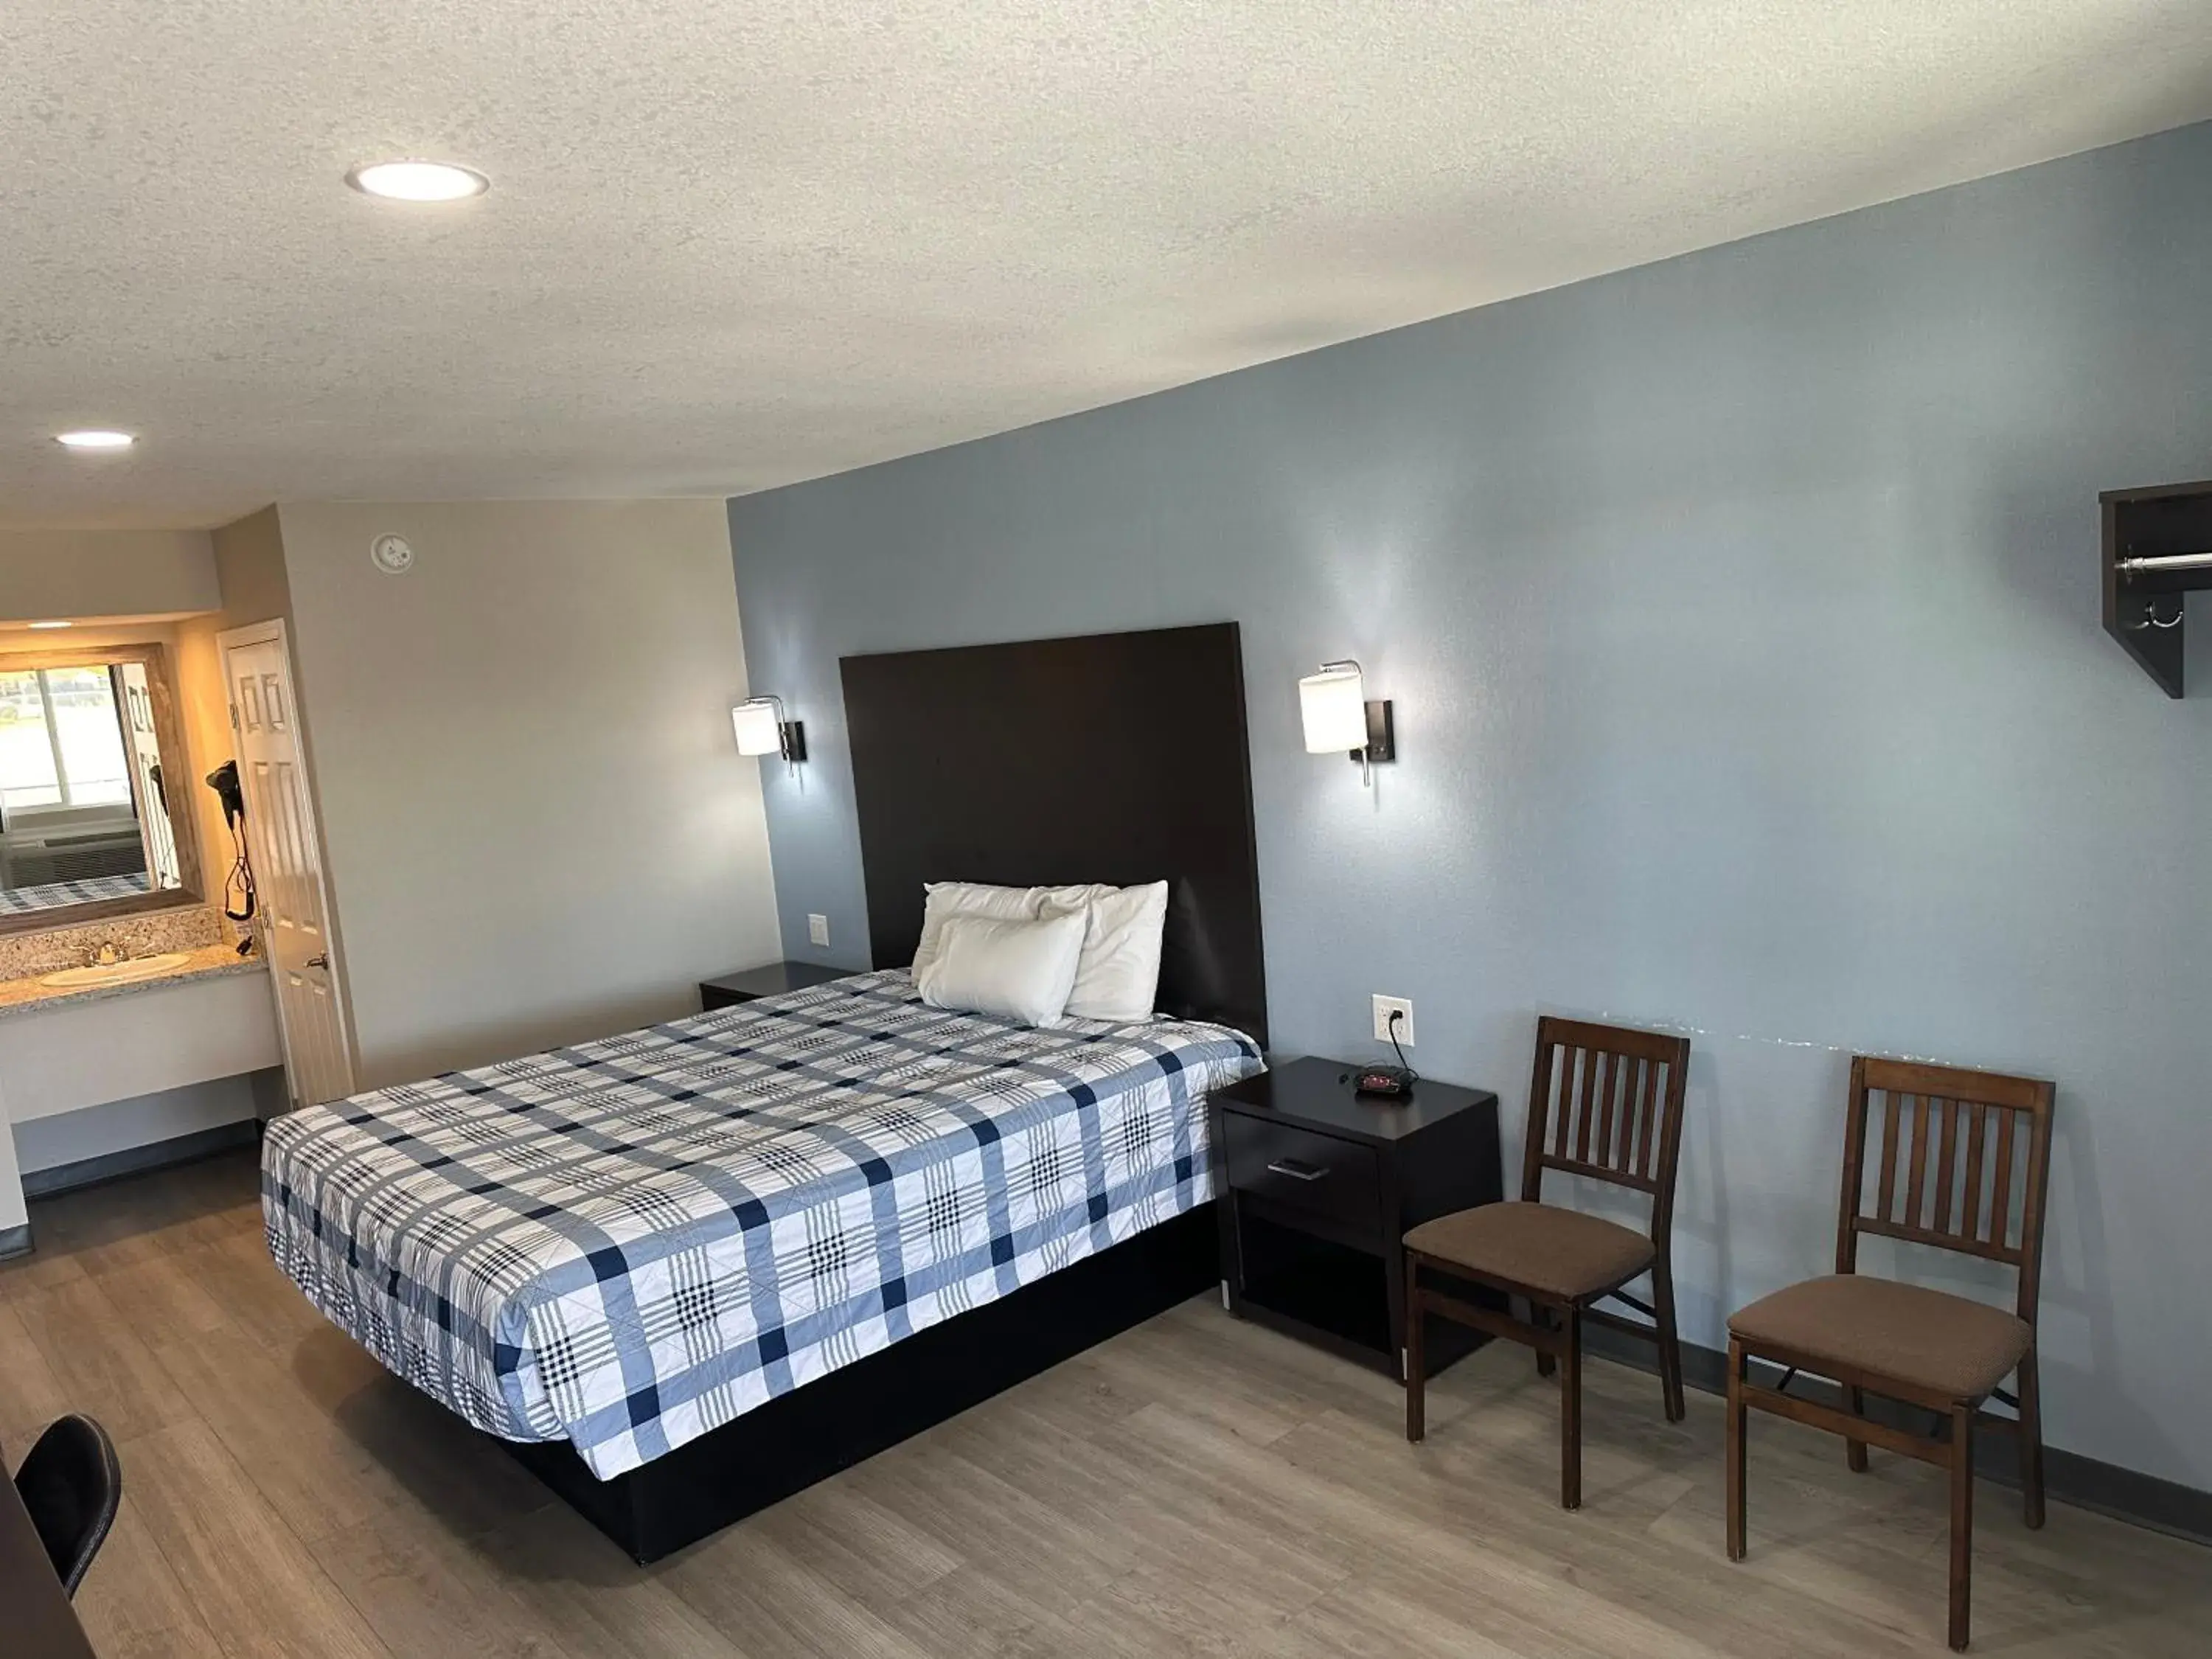 Bed in Gila Bend Lodge